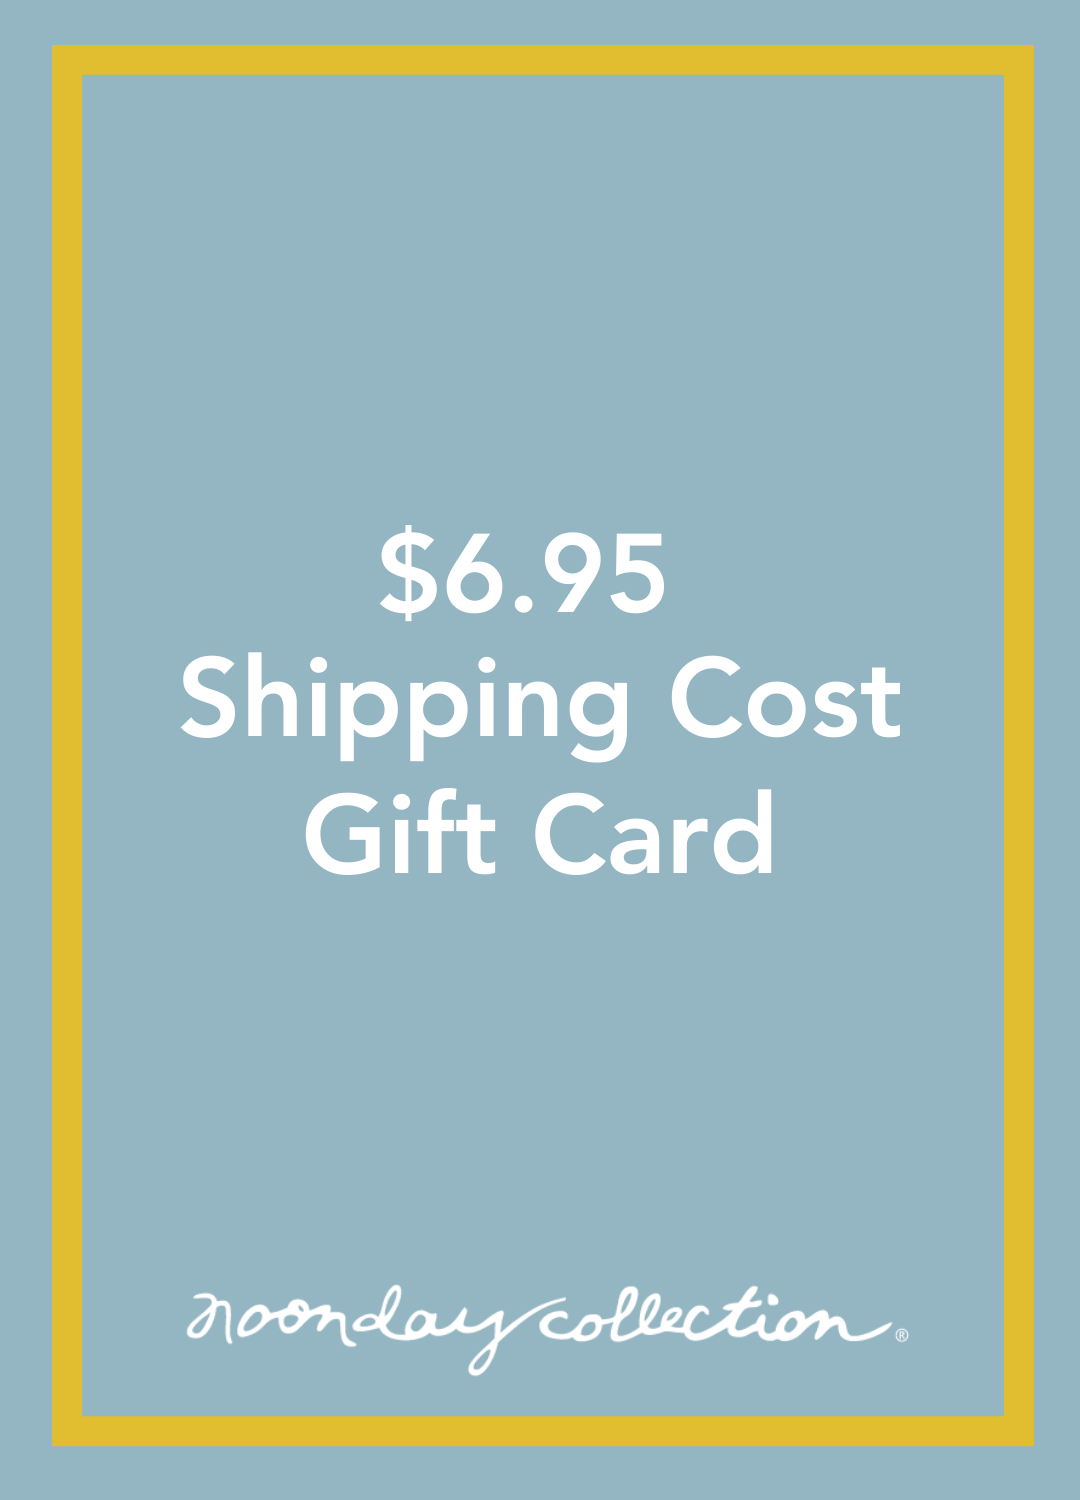 Noonday Shipping Cost Gift Card